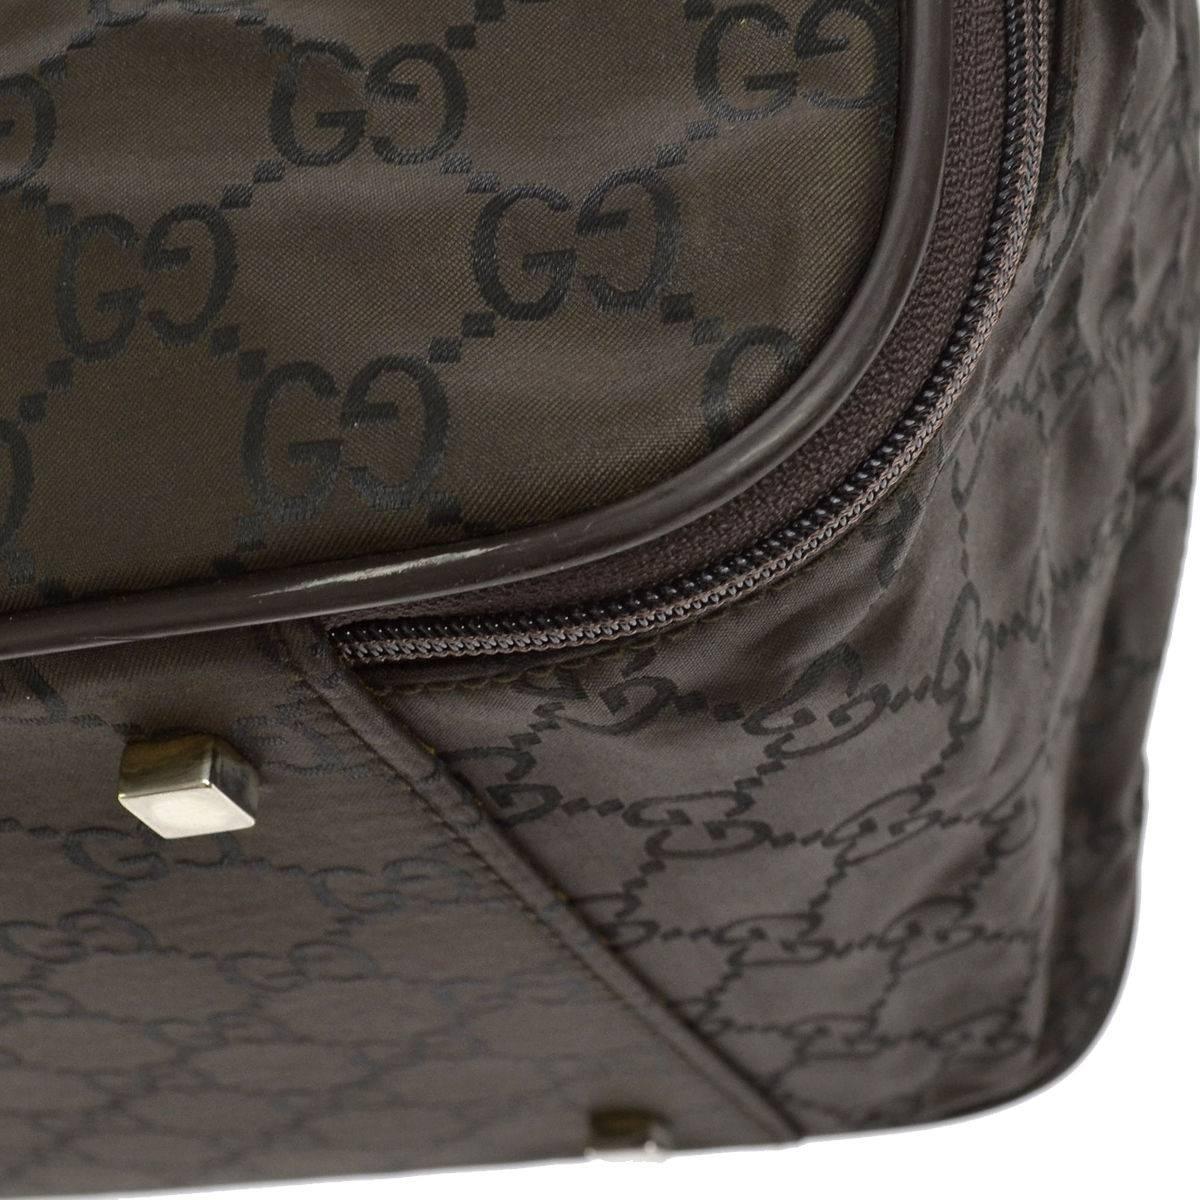 CURATOR'S NOTES

Gucci Chocolate Gucci Monogram CarryAll Duffle Luggage Travel Bag With Accessories amiable at Newfound Luxury 

Leather
Nylon
Vinyl
Zipper closure
Made in Italy
Handle 6"
Measures 27.5" W x 17" H x 9" D 
Handle